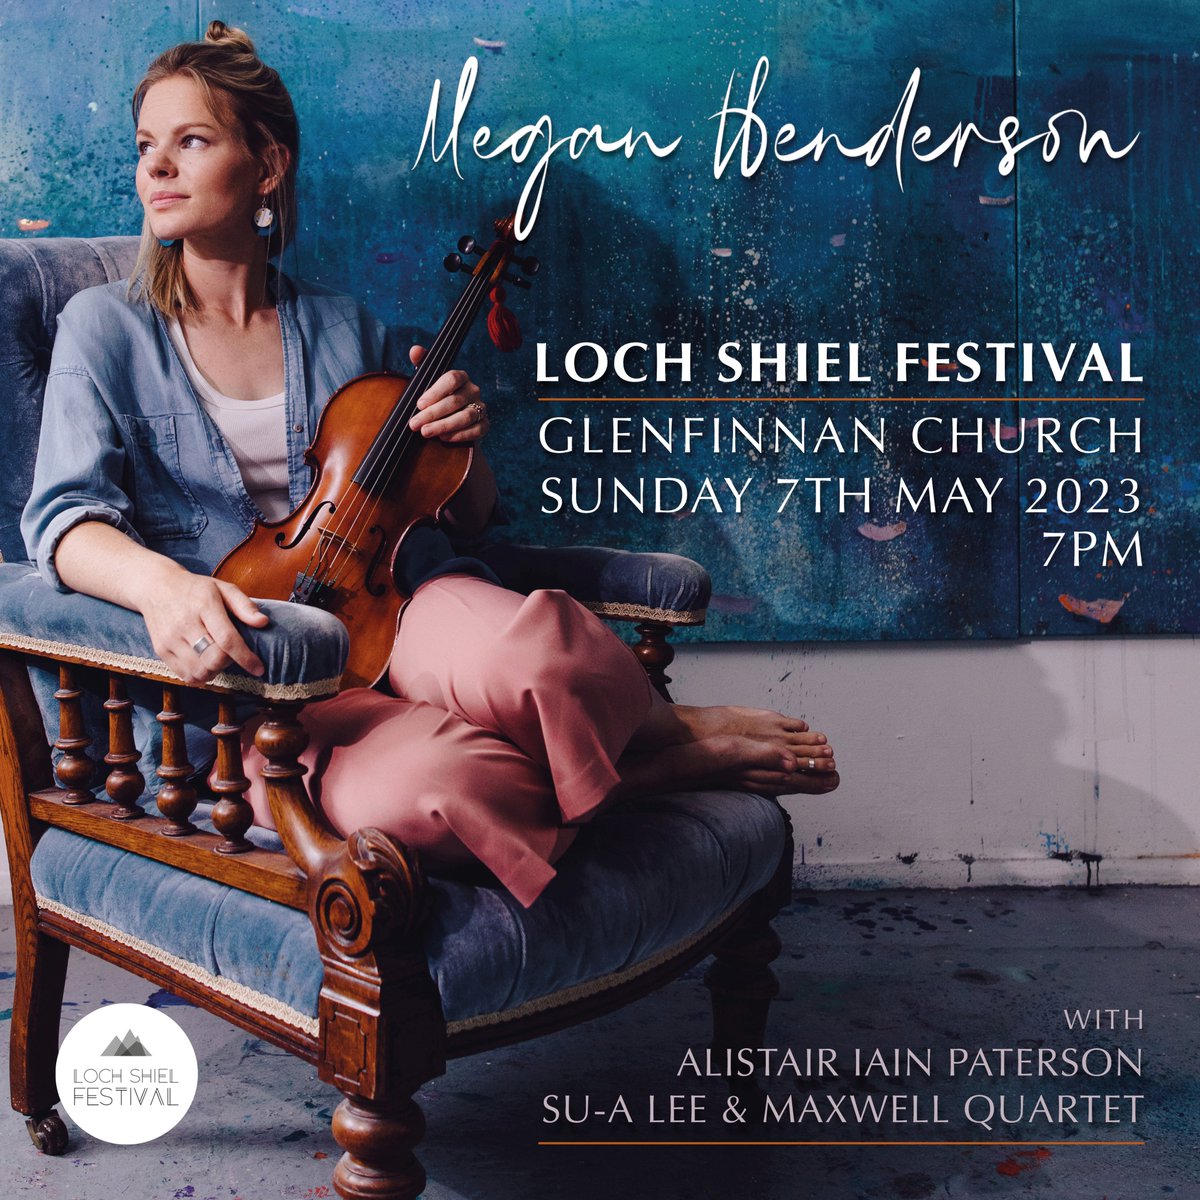 Delighted to be playing a part in this years @LochShielFest alongside @sualeecello @alistairiainpaterson and working up some music with @MaxwellQuartet lochshielfestival.com